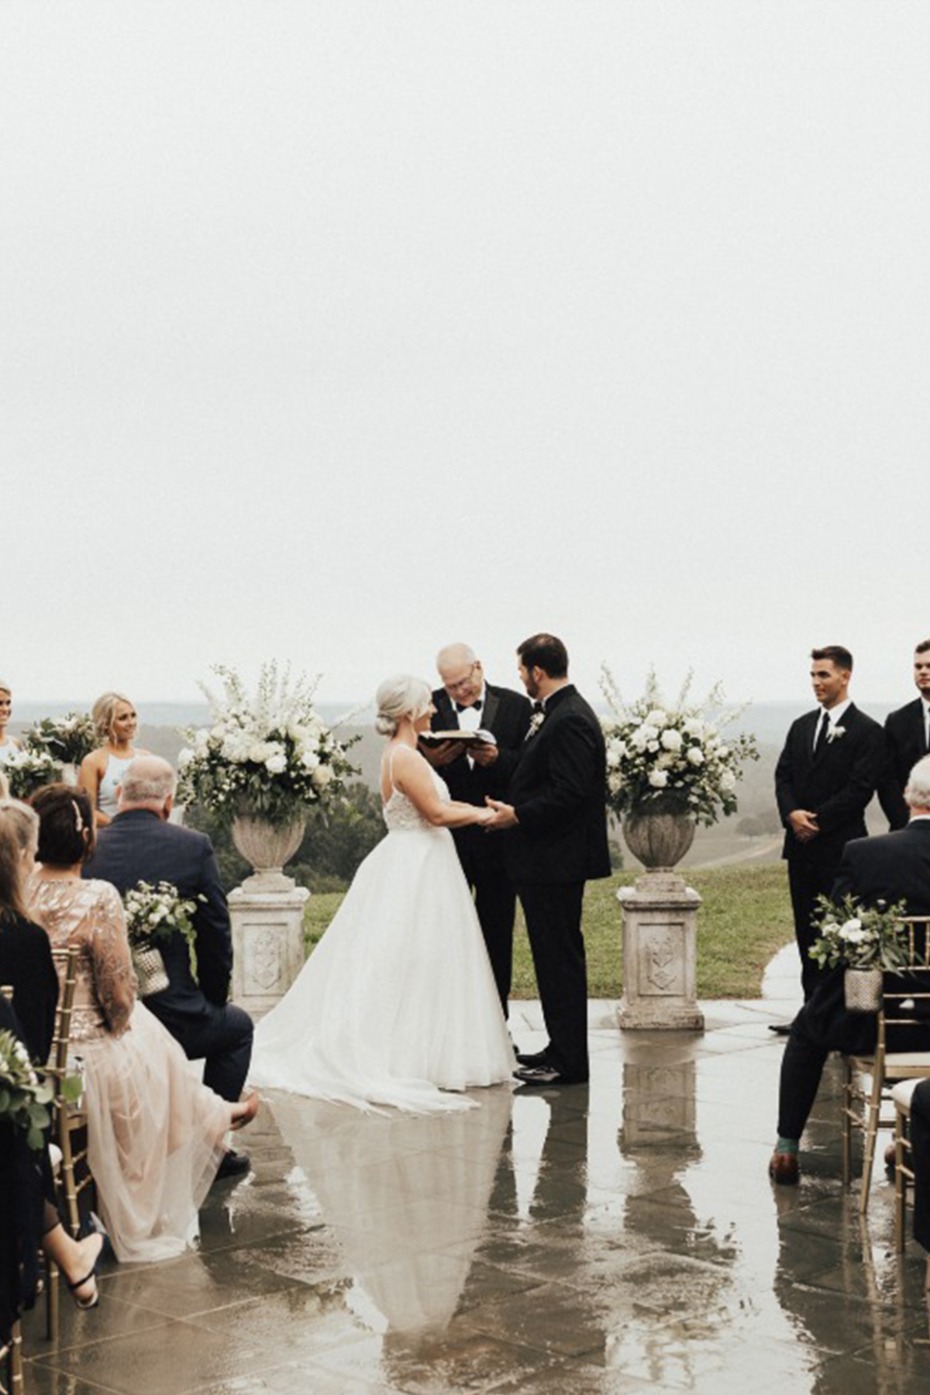 A Rainy Day Winery Wedding You Are Going To Love